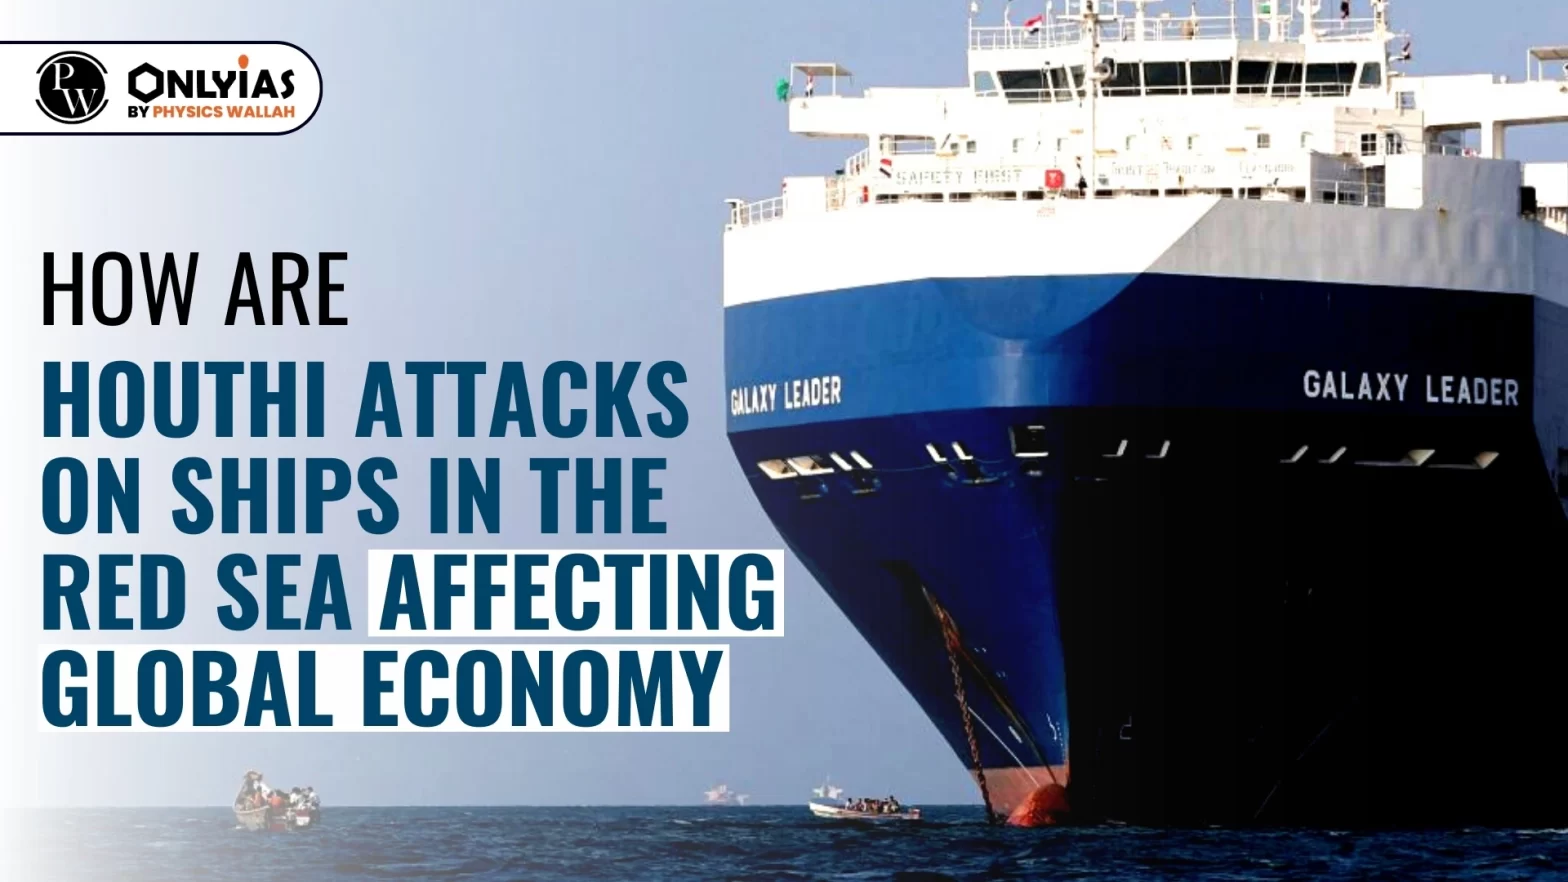 How Are Houthi Attacks On Ships In The Red Sea Affecting Global Economy?